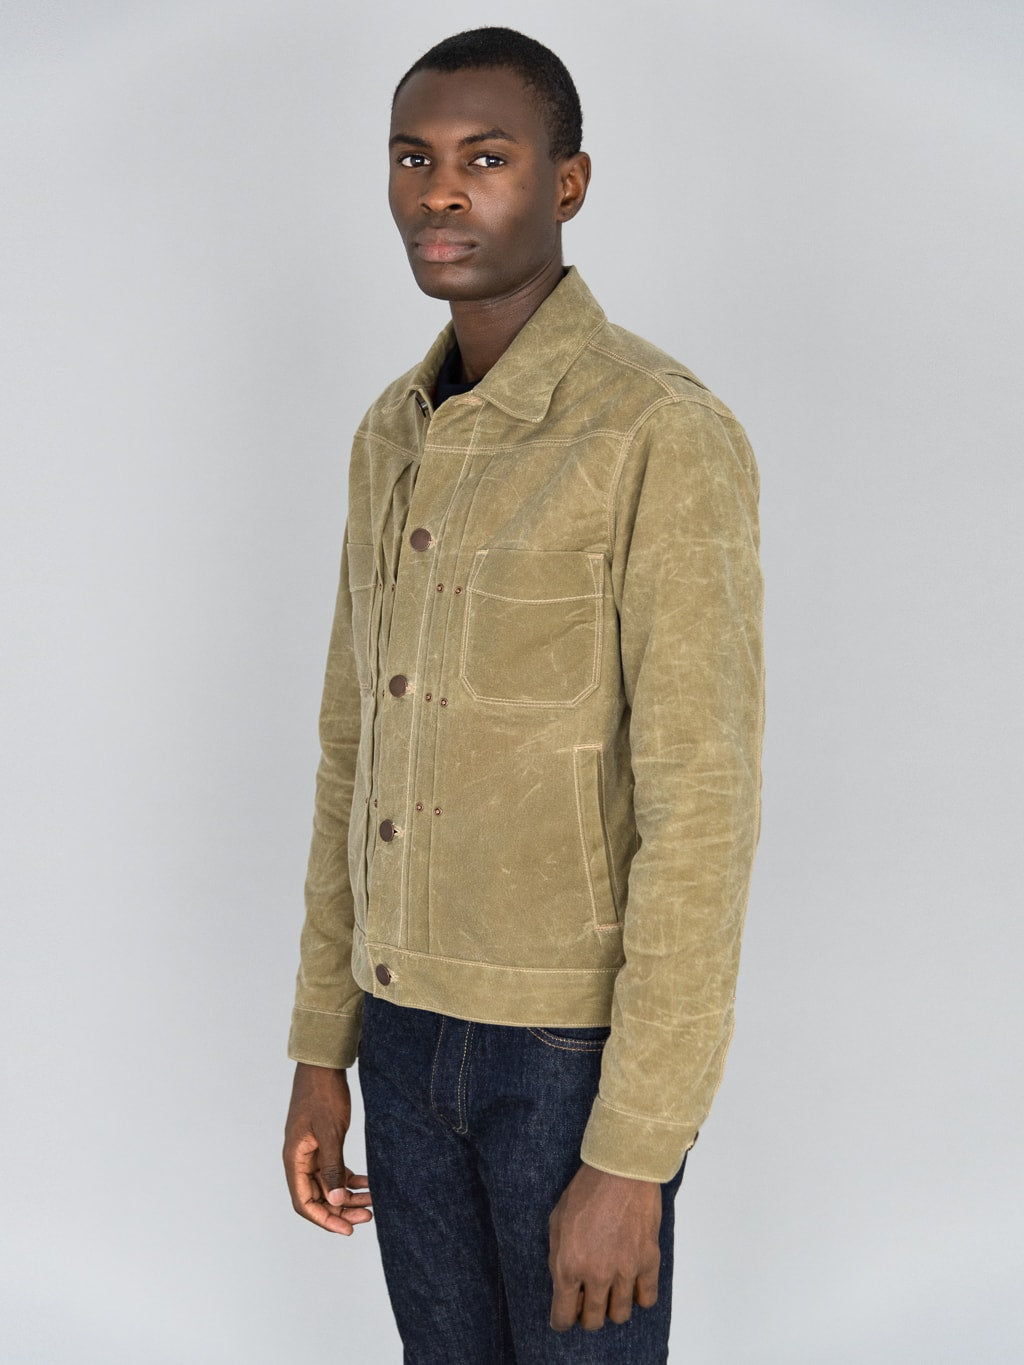 Freenote Cloth Riders Jacket Waxed Canvas Tobacco Green Interior model side fit